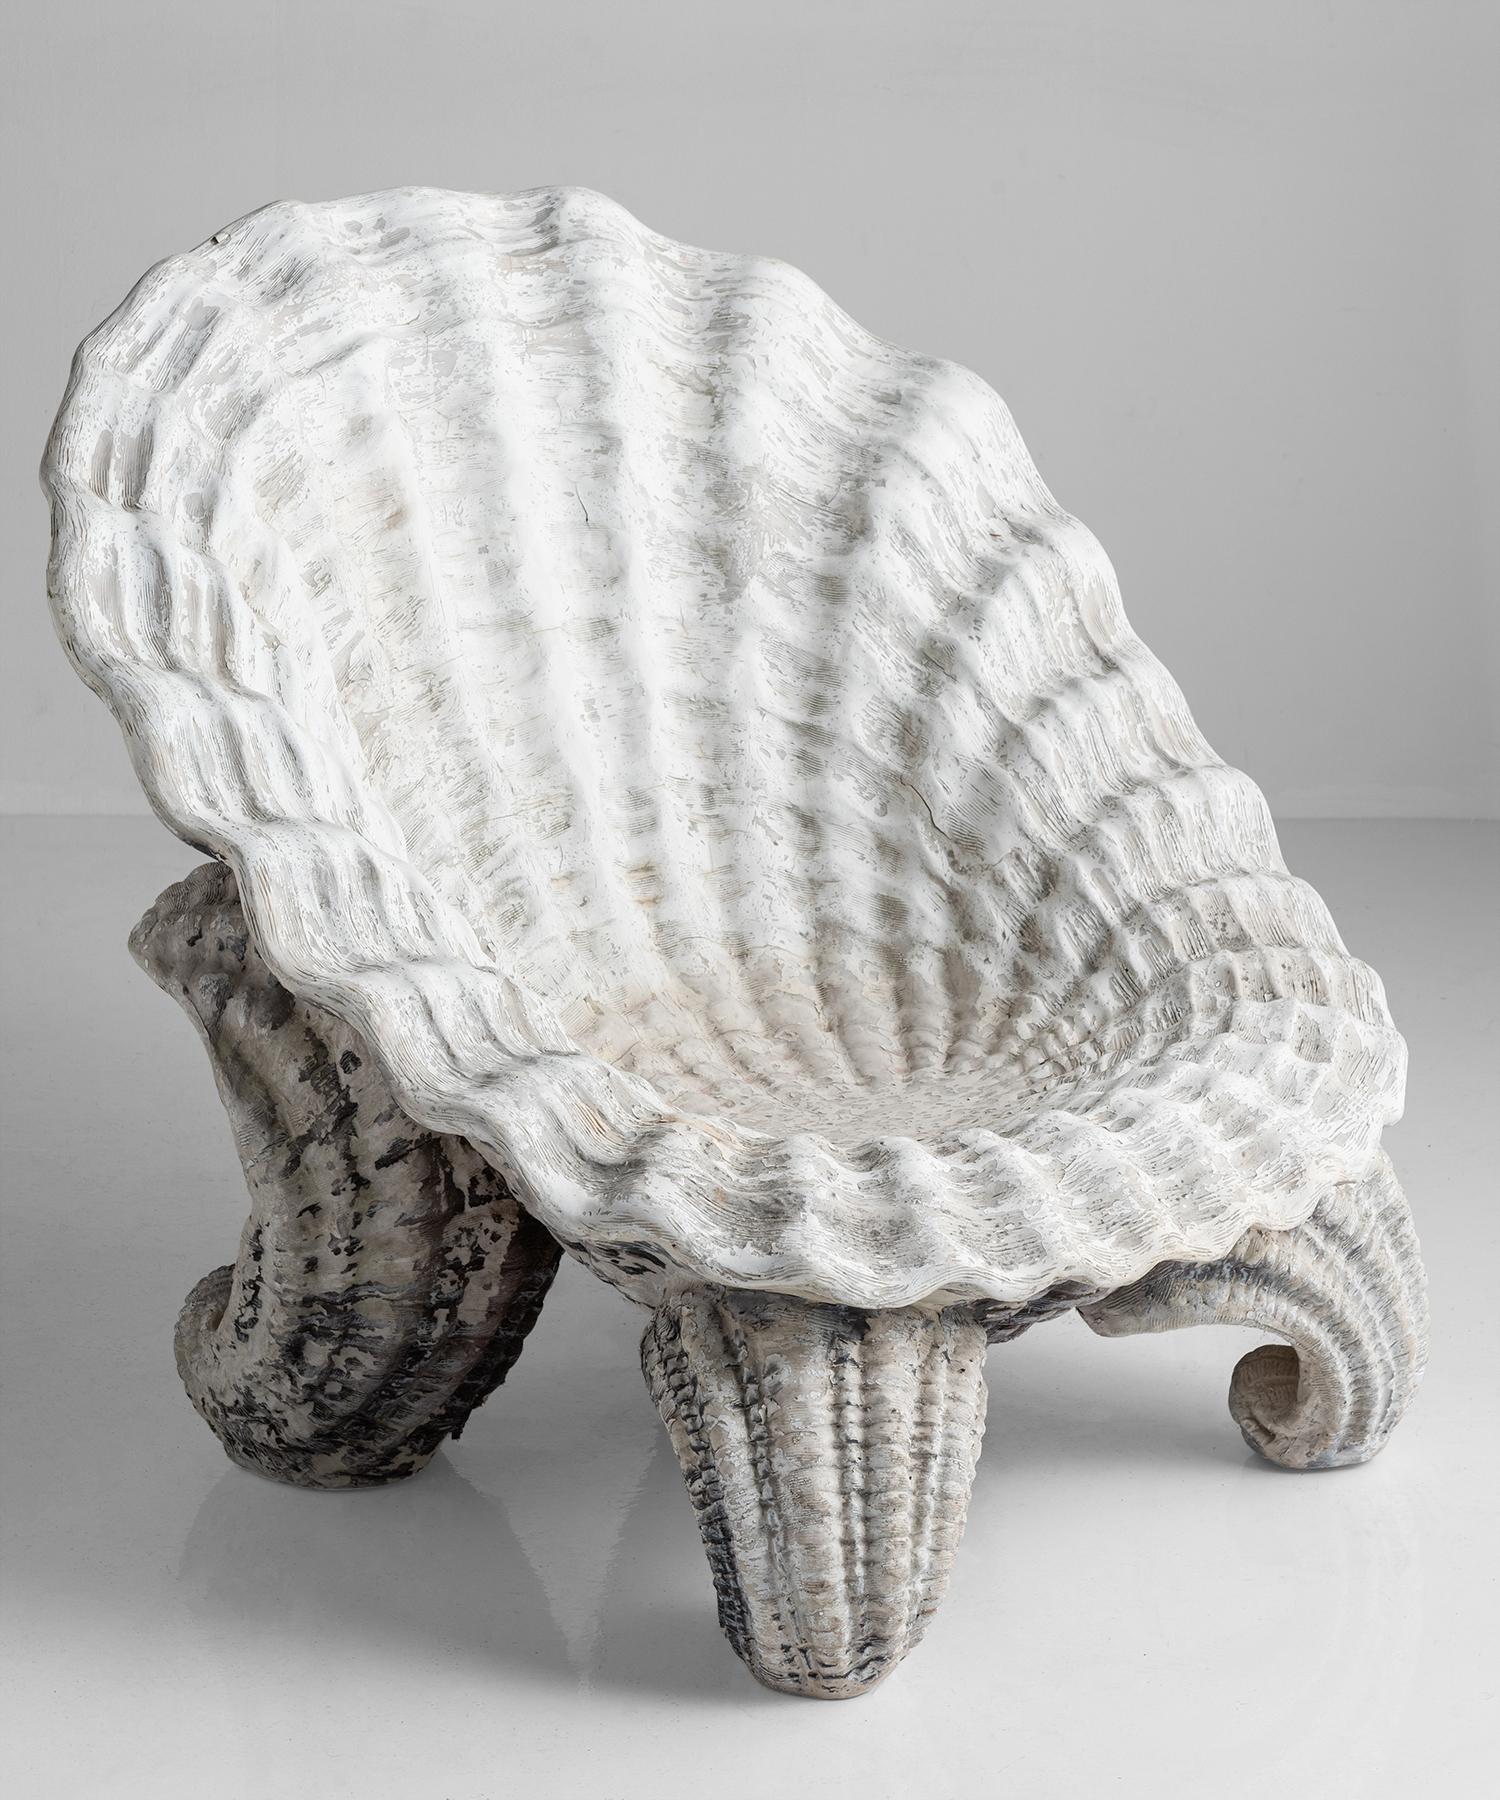 Shell grotto garden chair, 20th century

Rare composite chair with unique form and original patina.